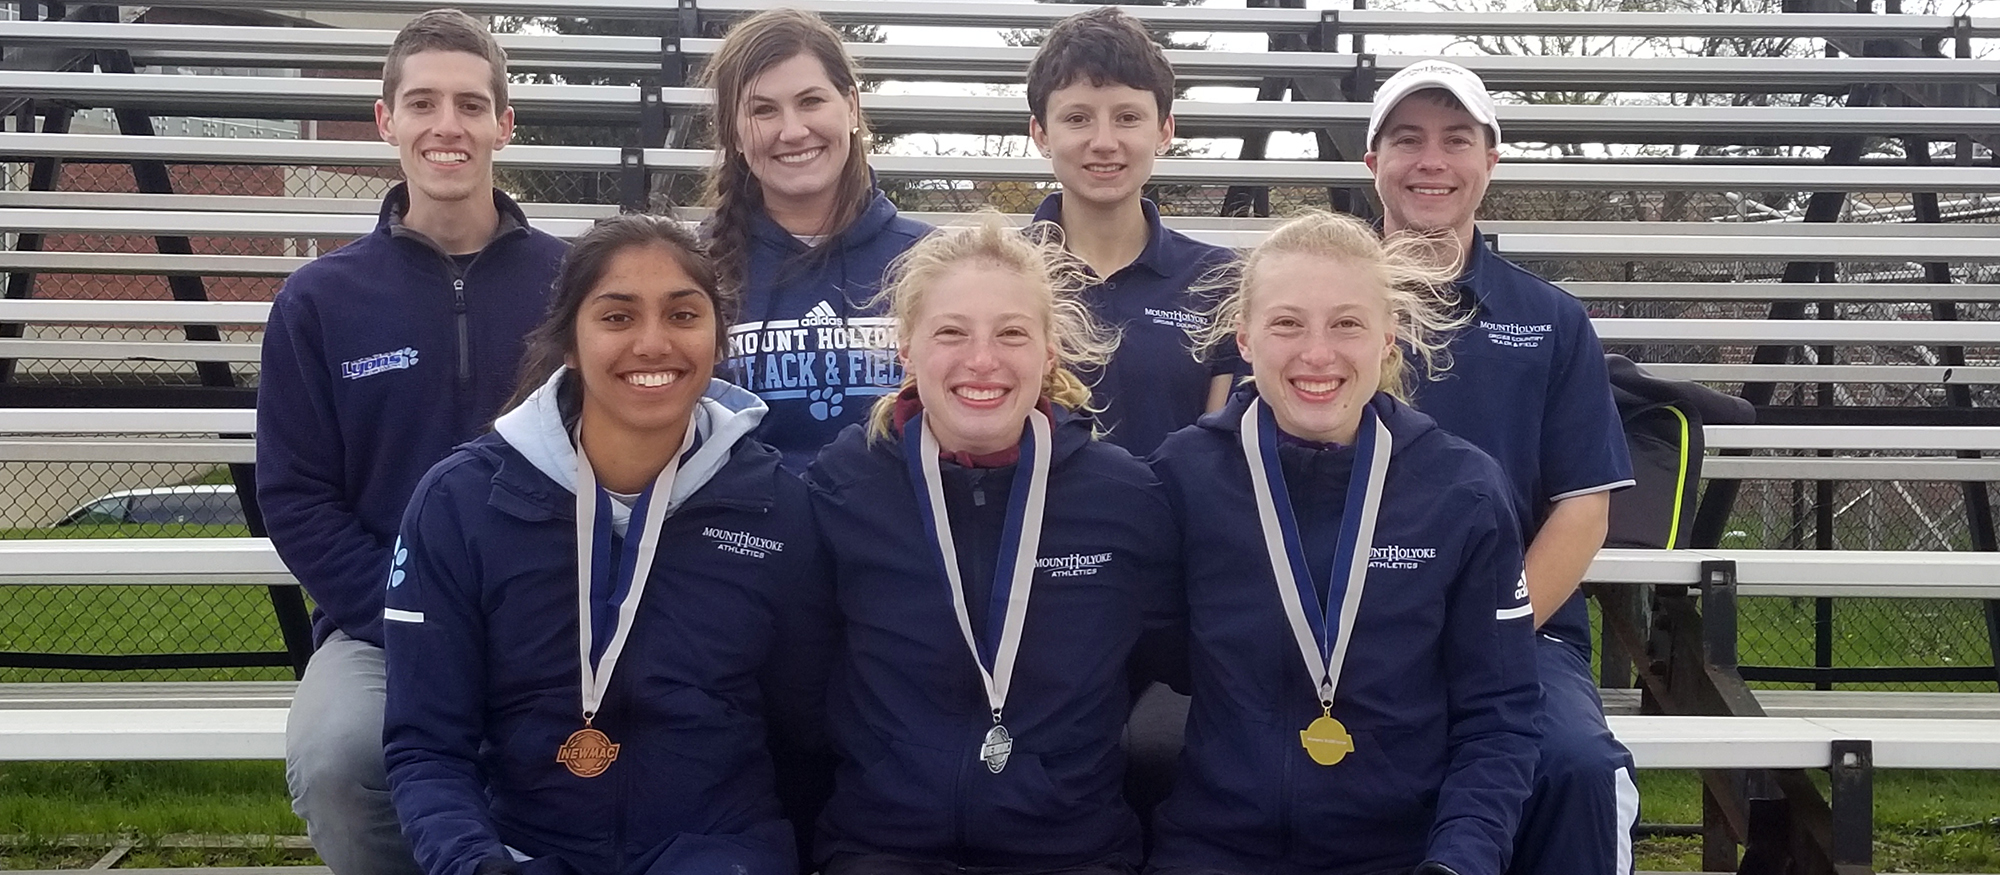 NEWMAC Medalists (Front Row) right to left: 10000m champion Hannah Rieders, 10000m runner-up Madeline Rieders, 1500m third place Simone Jacob. Back row featuring Mount Holyoke coaches.